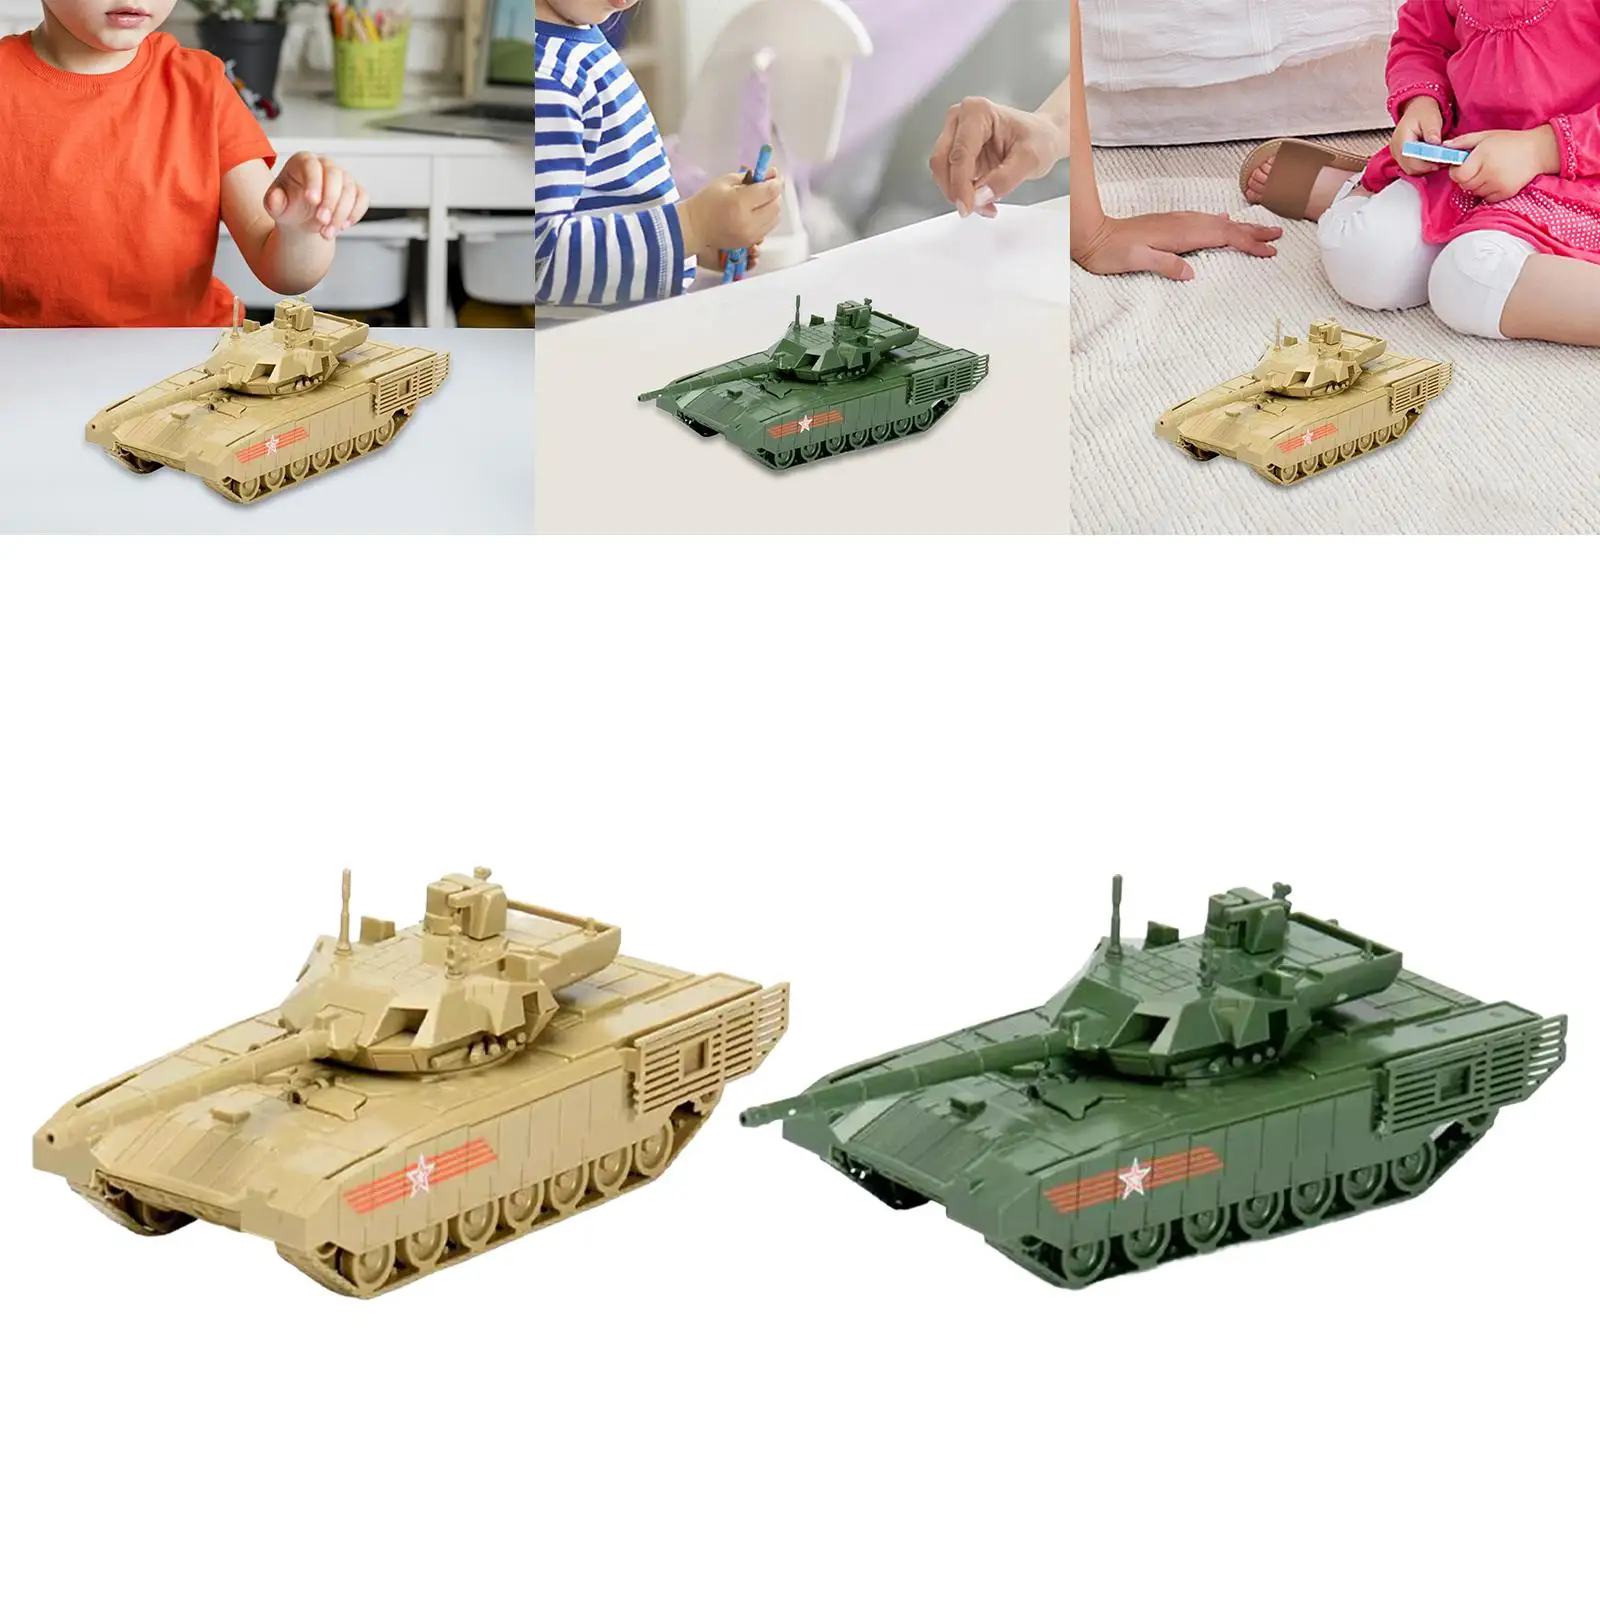 1/72 Tank Assembly Model Tabletop Decor Ornament Educational Toy Vehicle Tank Model Toy for Kids Boys Girls Adults Birthday Gift